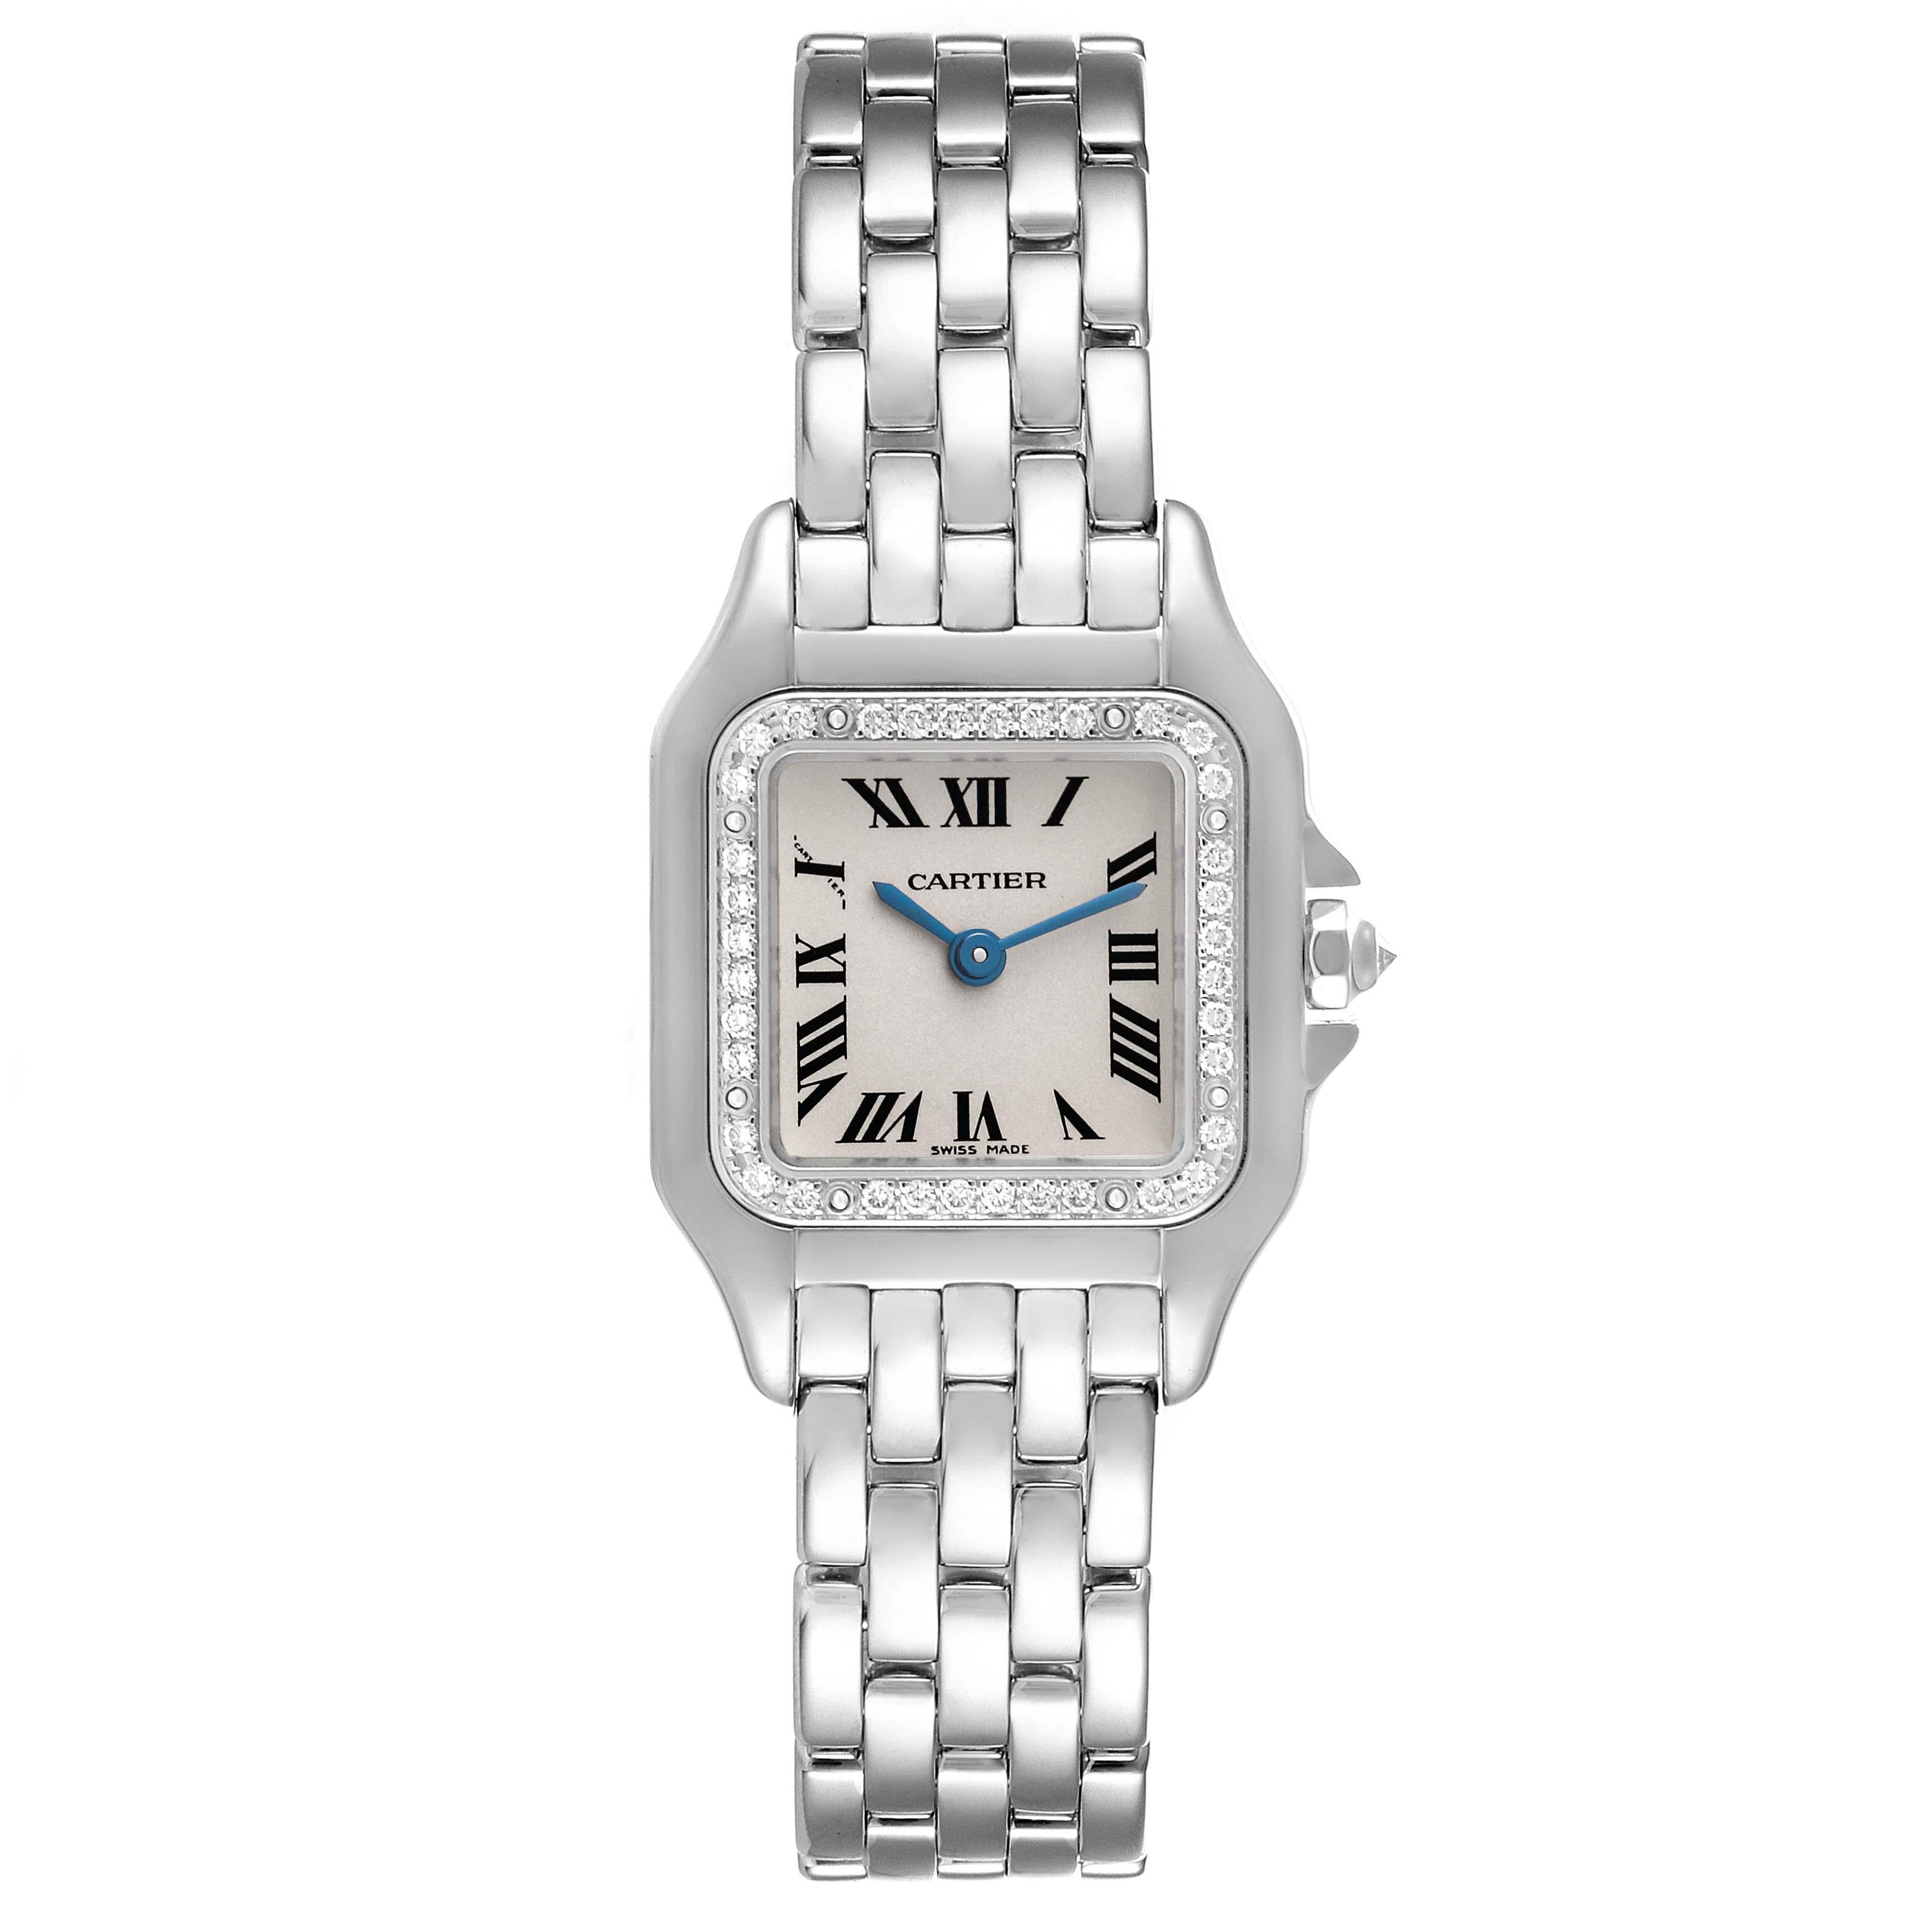 Cartier Panthere White Gold Diamond Bezel Ladies Watch WF3091F3. Quartz movement. 18k white gold case 22.0 x 22.0 mm (28.0 including the lugs). Octagonal crown set with an original Cartier factory diamond. 18k white gold original Cartier factory